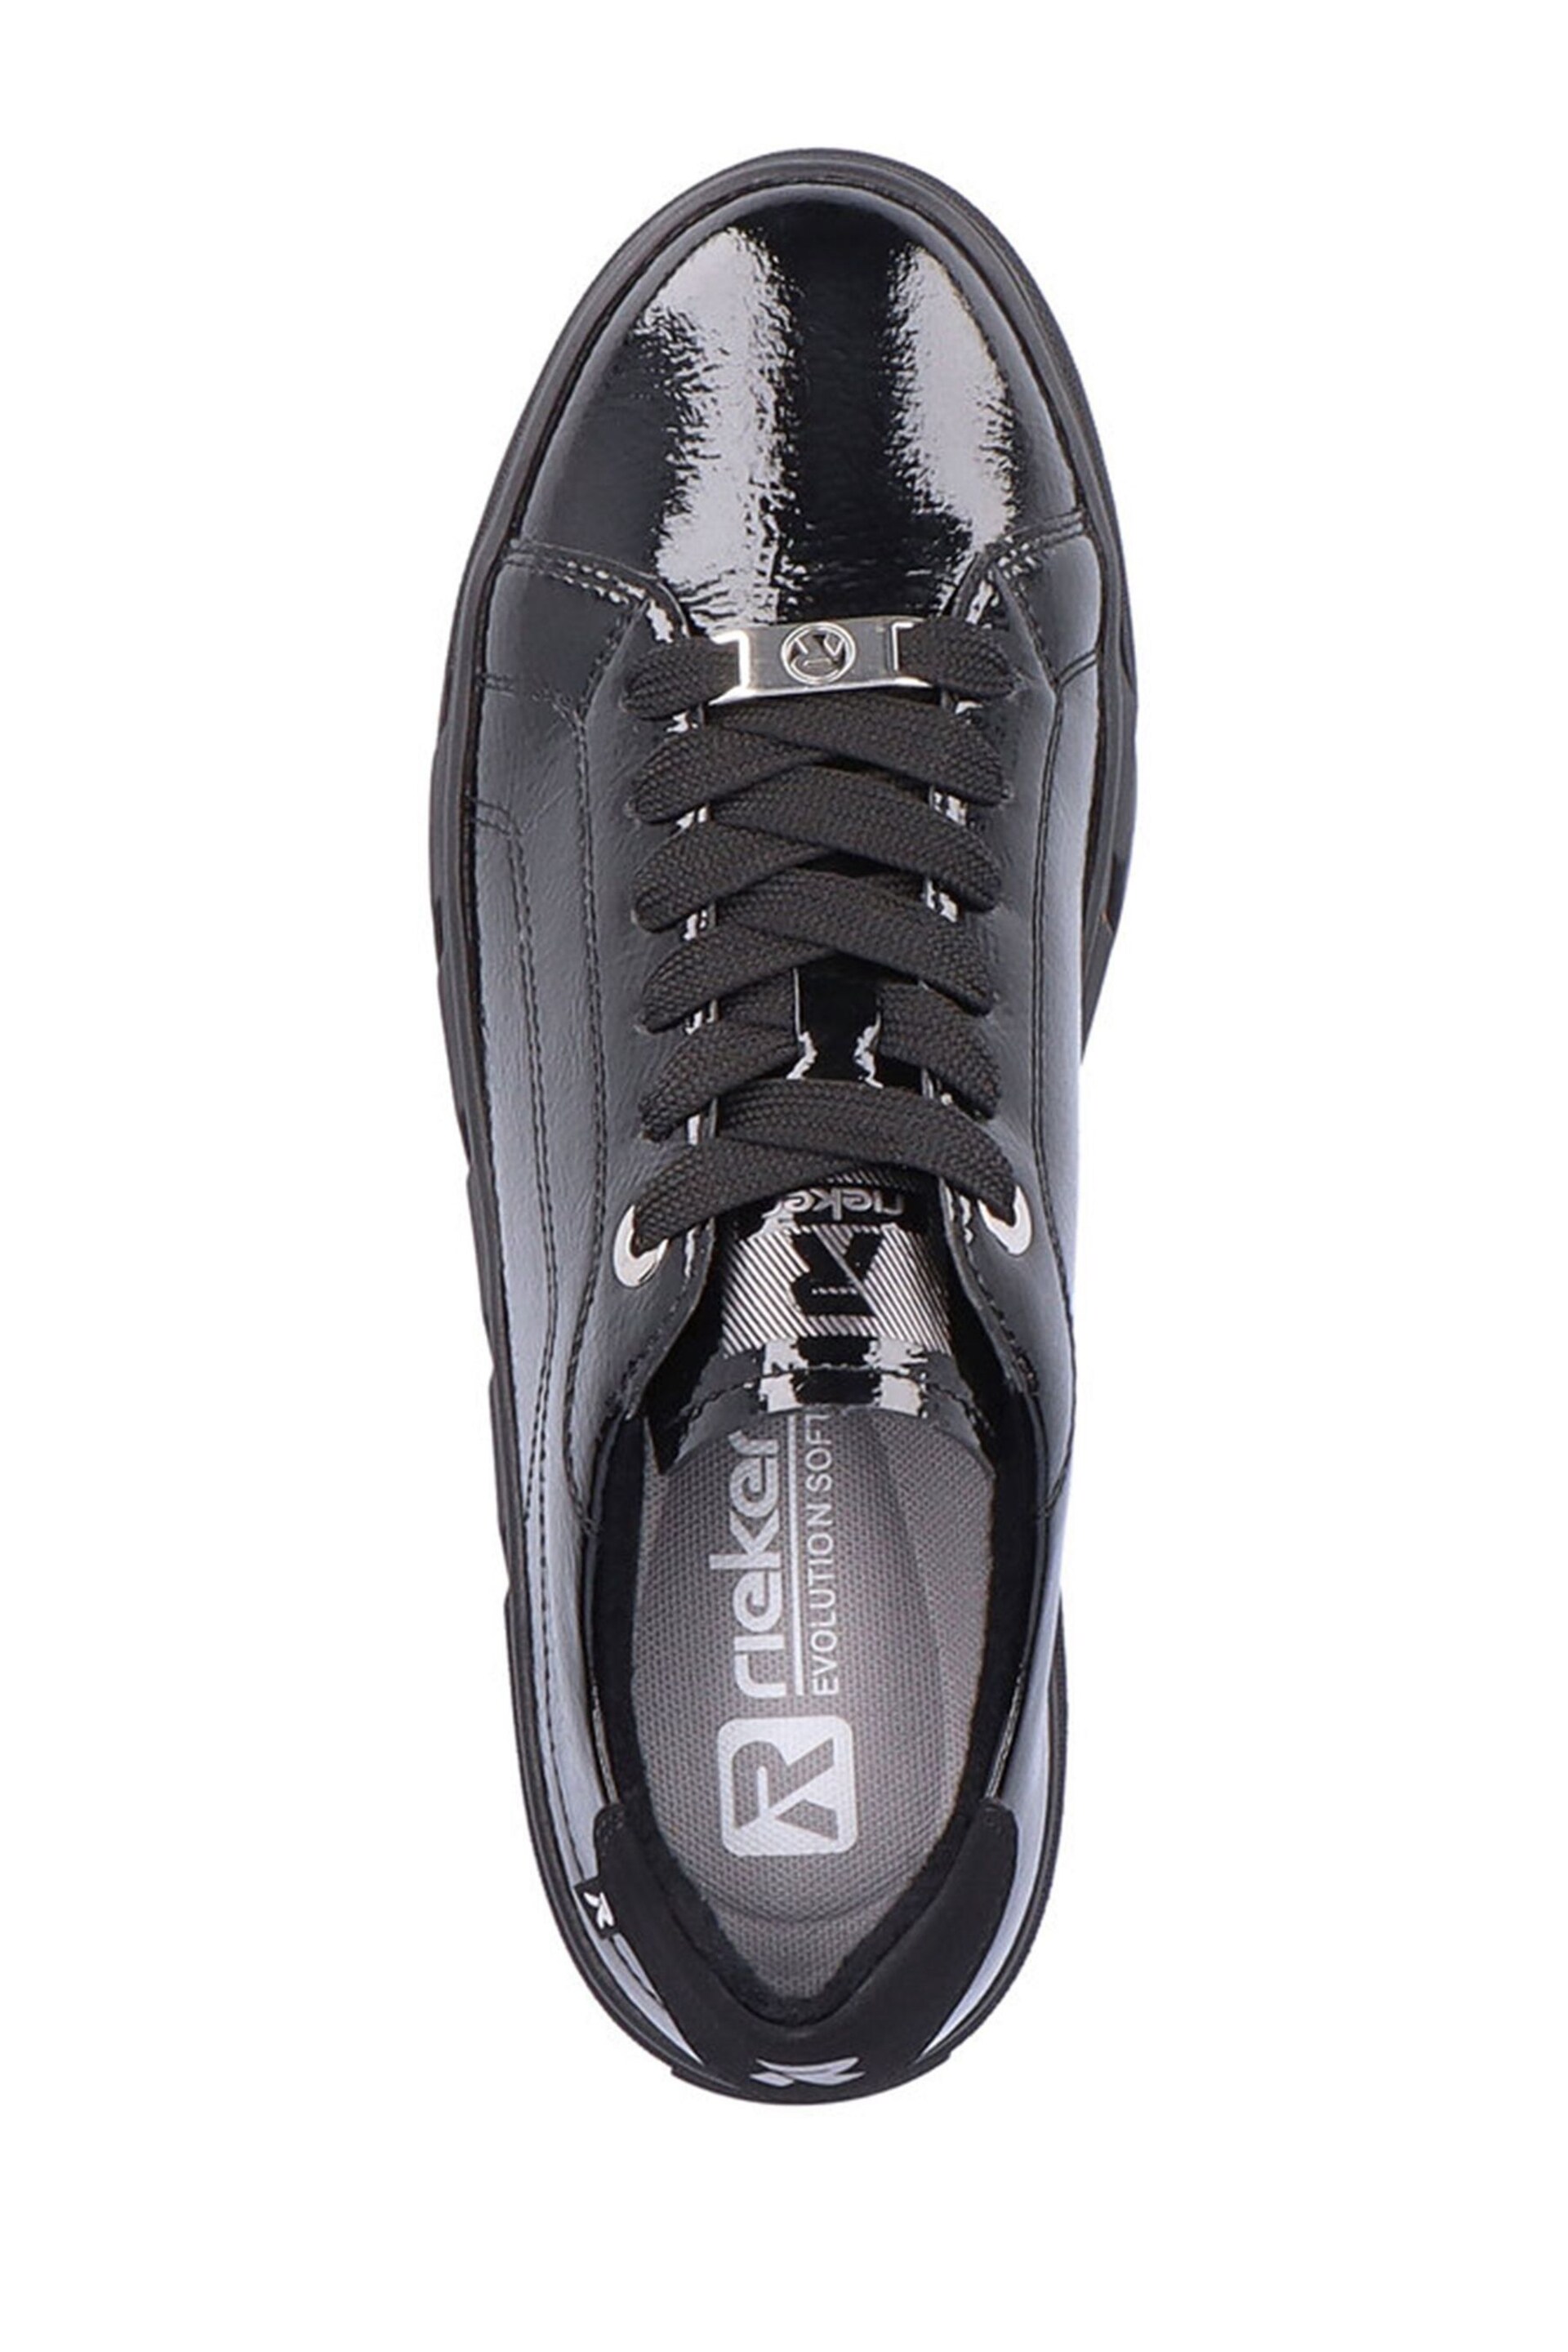 Rieker Womens Evolution Lace-Up Black Shoes - Image 6 of 11